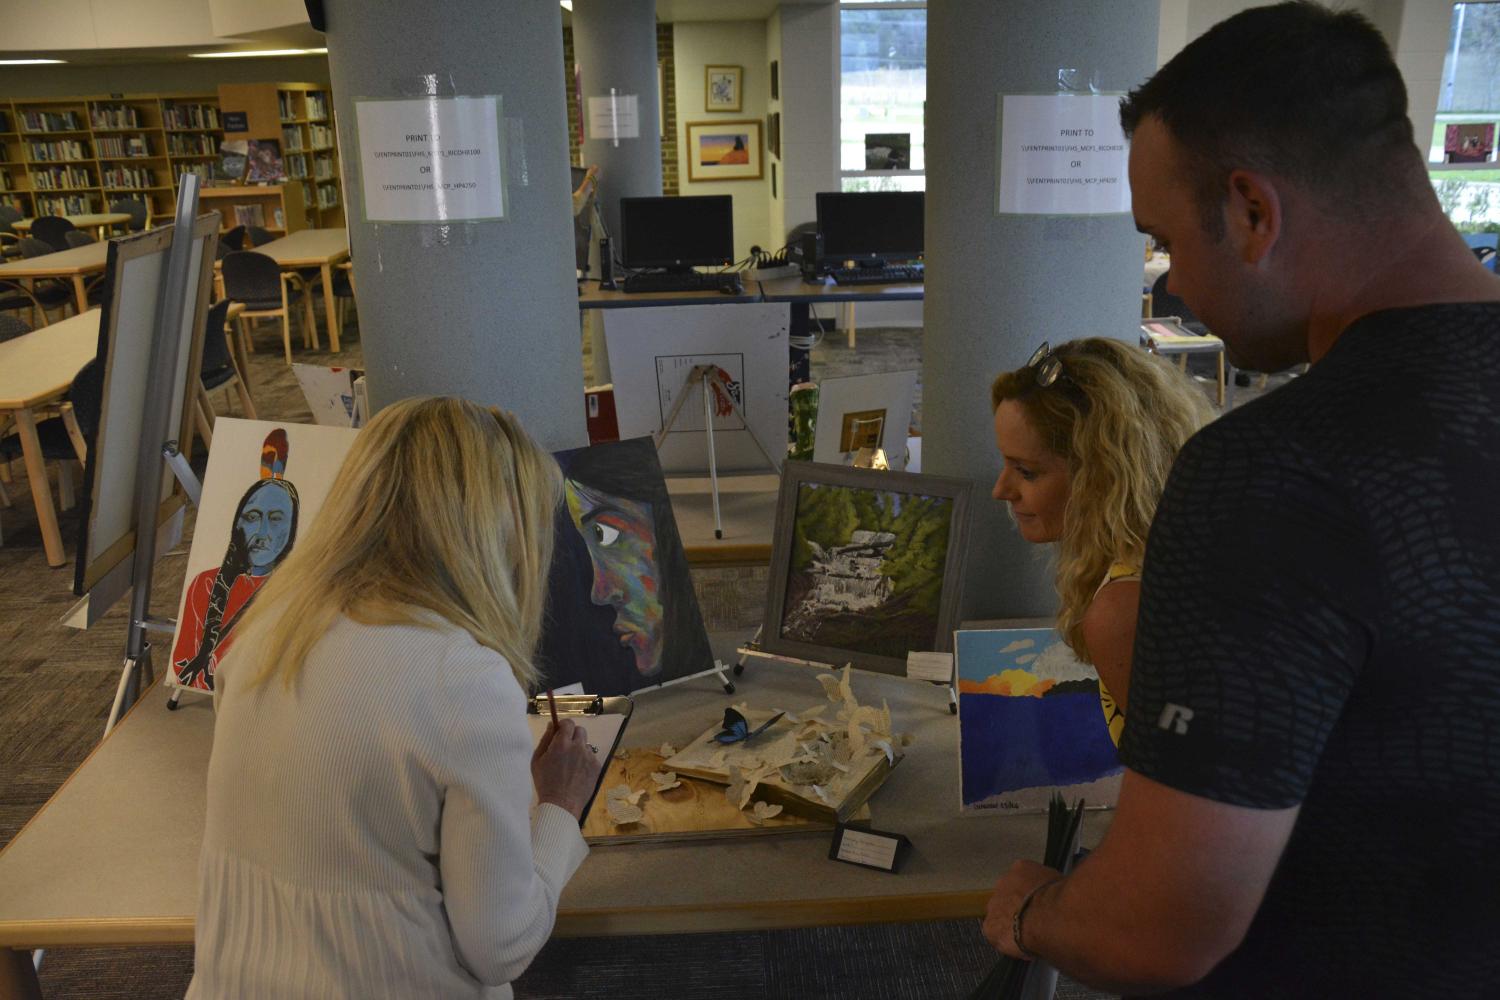 The judges evaluate the work displayed in the media center for the high school art show on April 27.